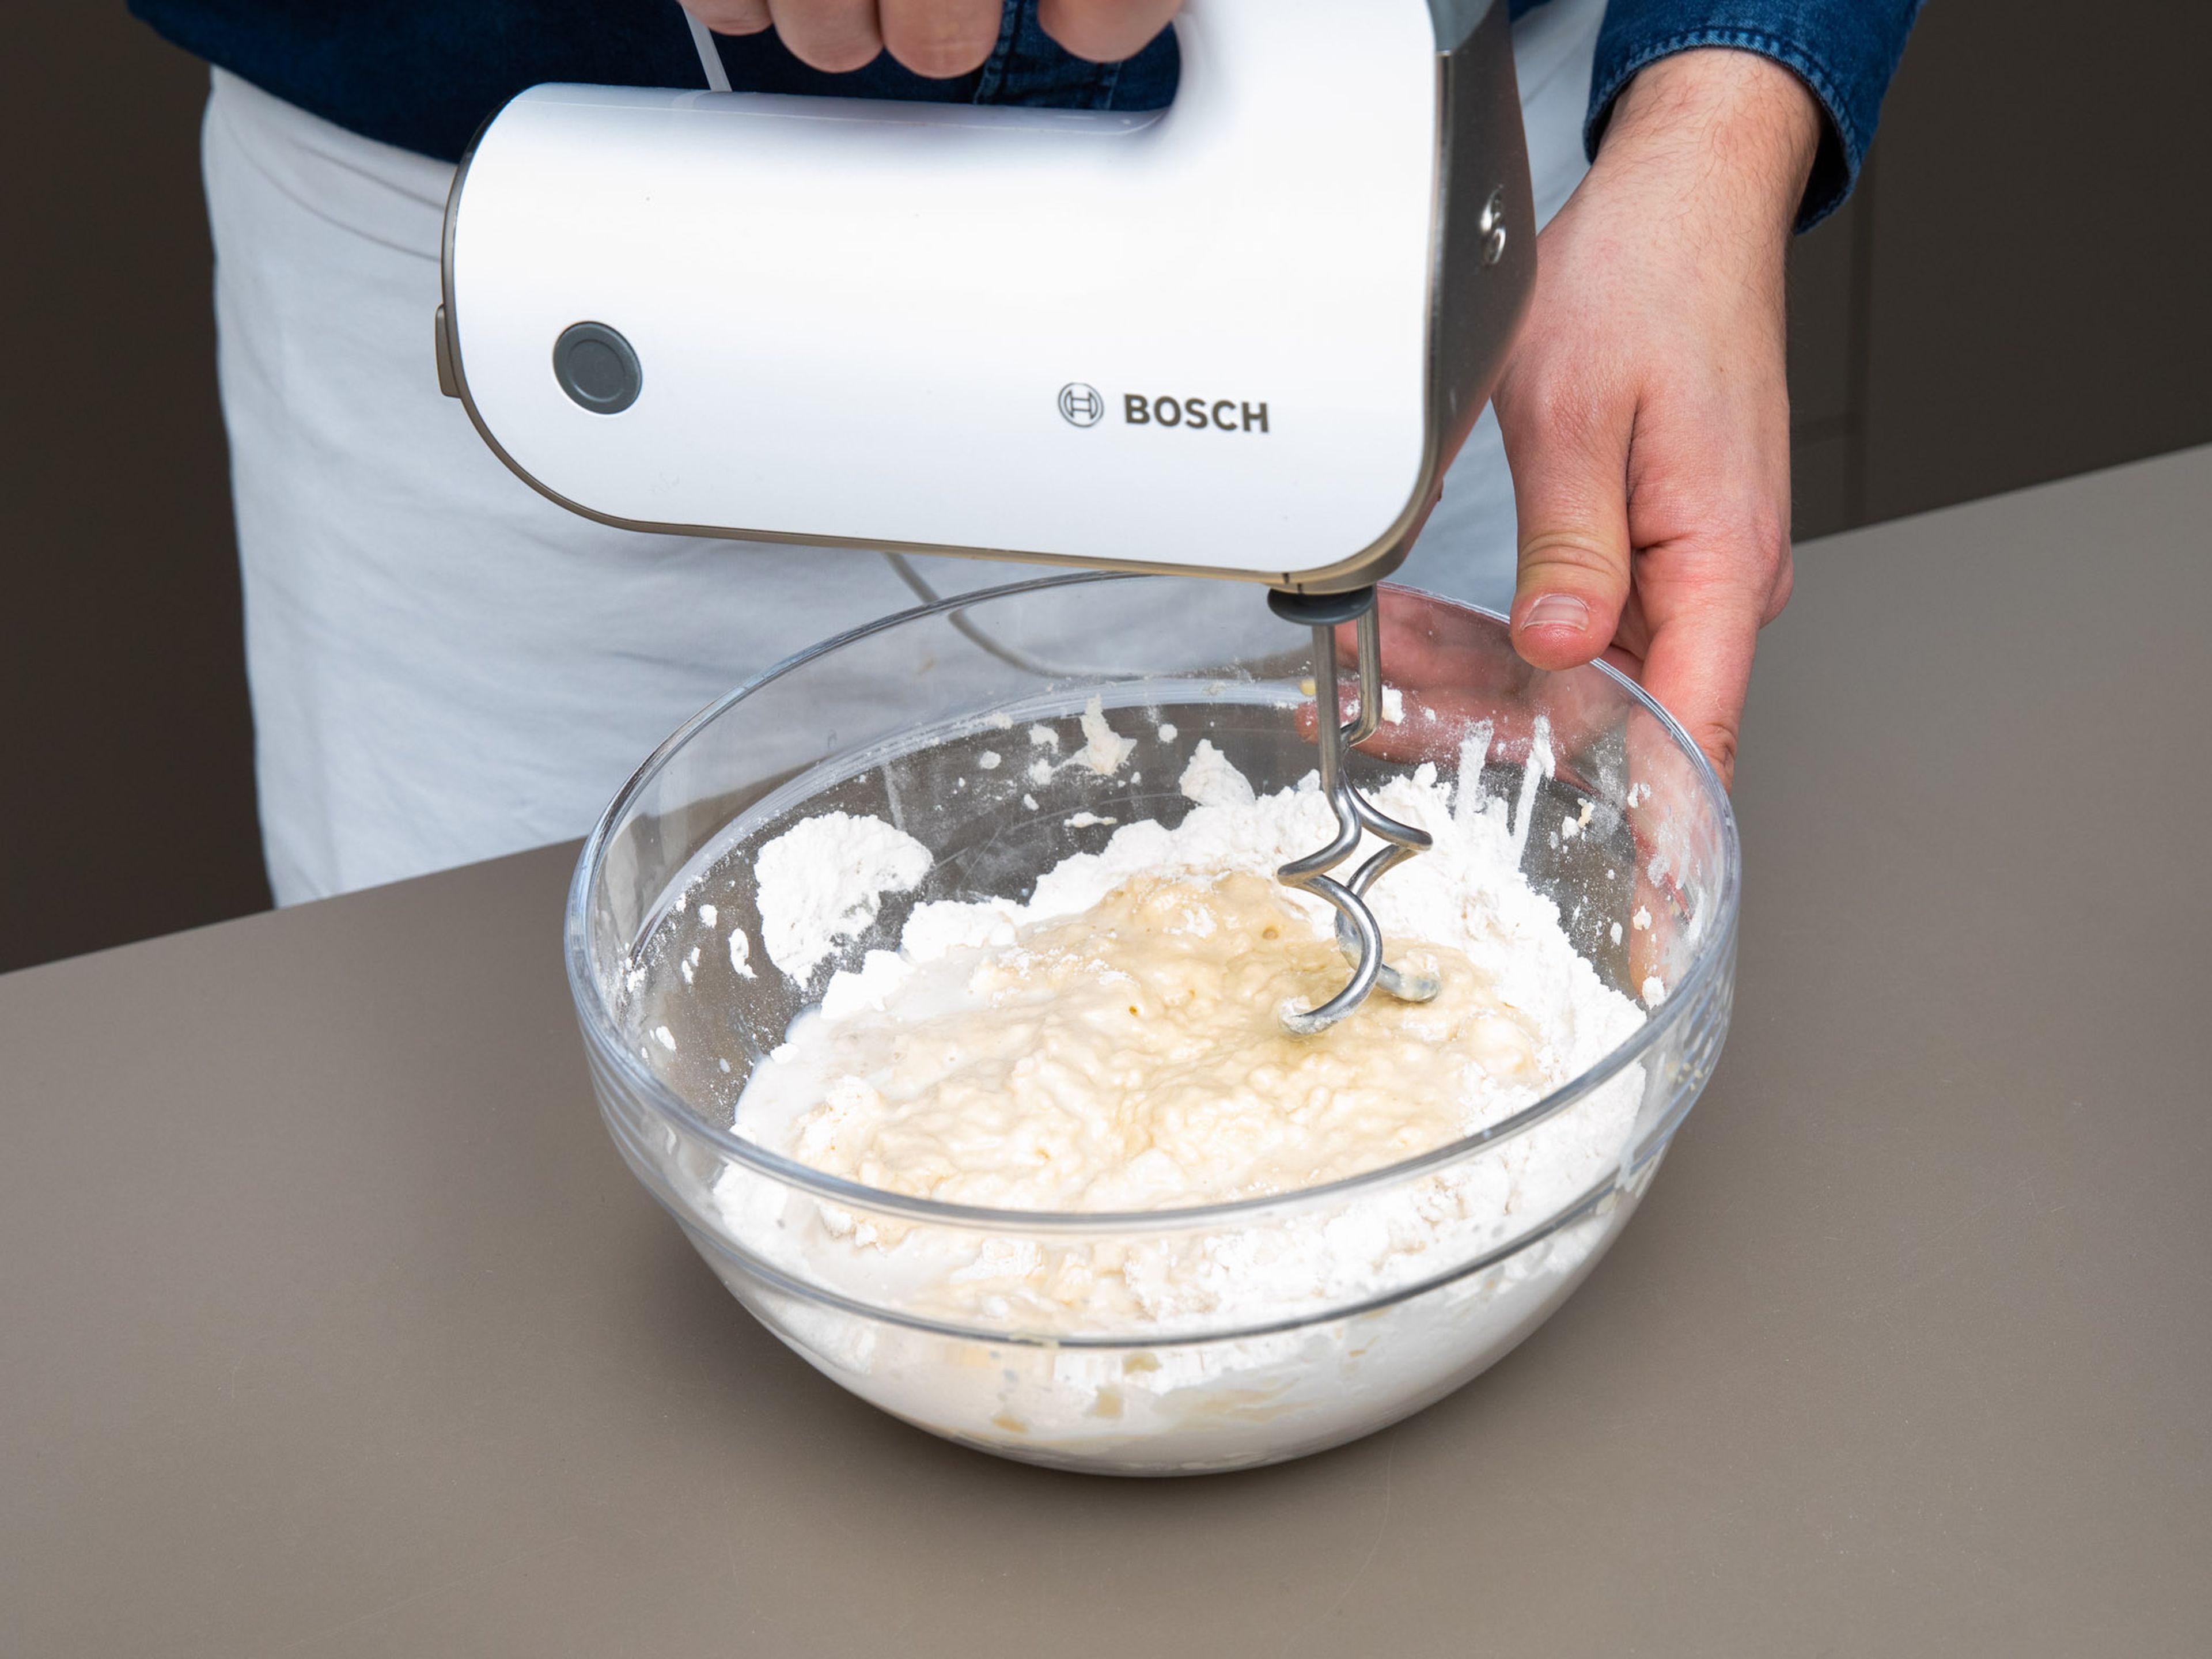 Add flour, remaining sugar, salt, some of the softened butter, and eggs to a large bowl and mix with a hand mixer with dough hooks until combined. Add yeast-milk mixture little by little until a smooth dough forms.